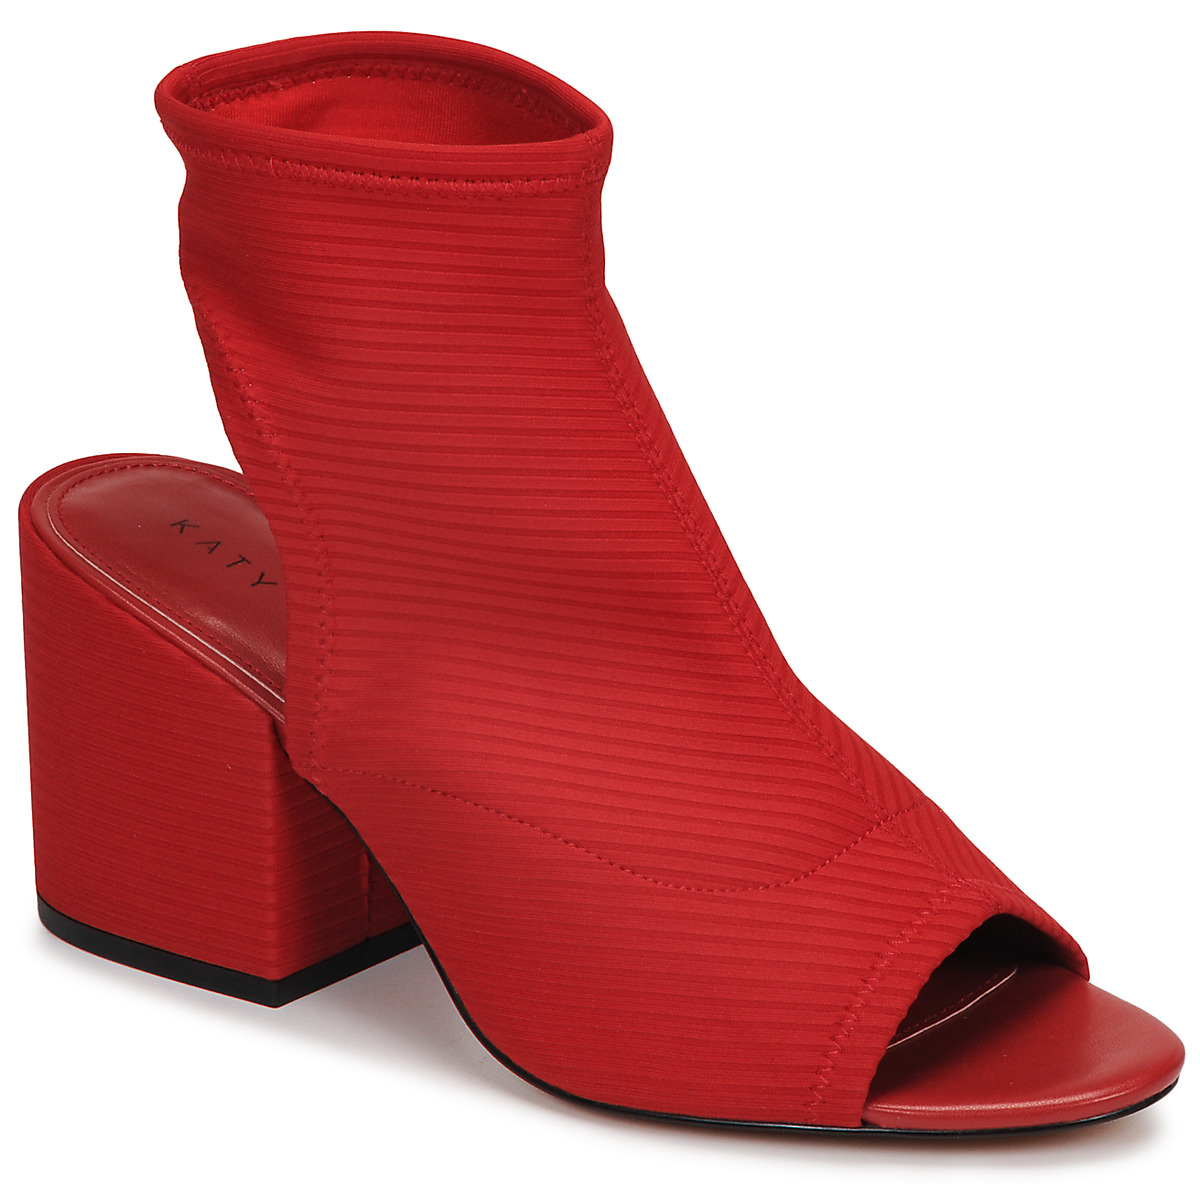 Chaussures Femme Coco & Abricot THE JOHANNA Rouge